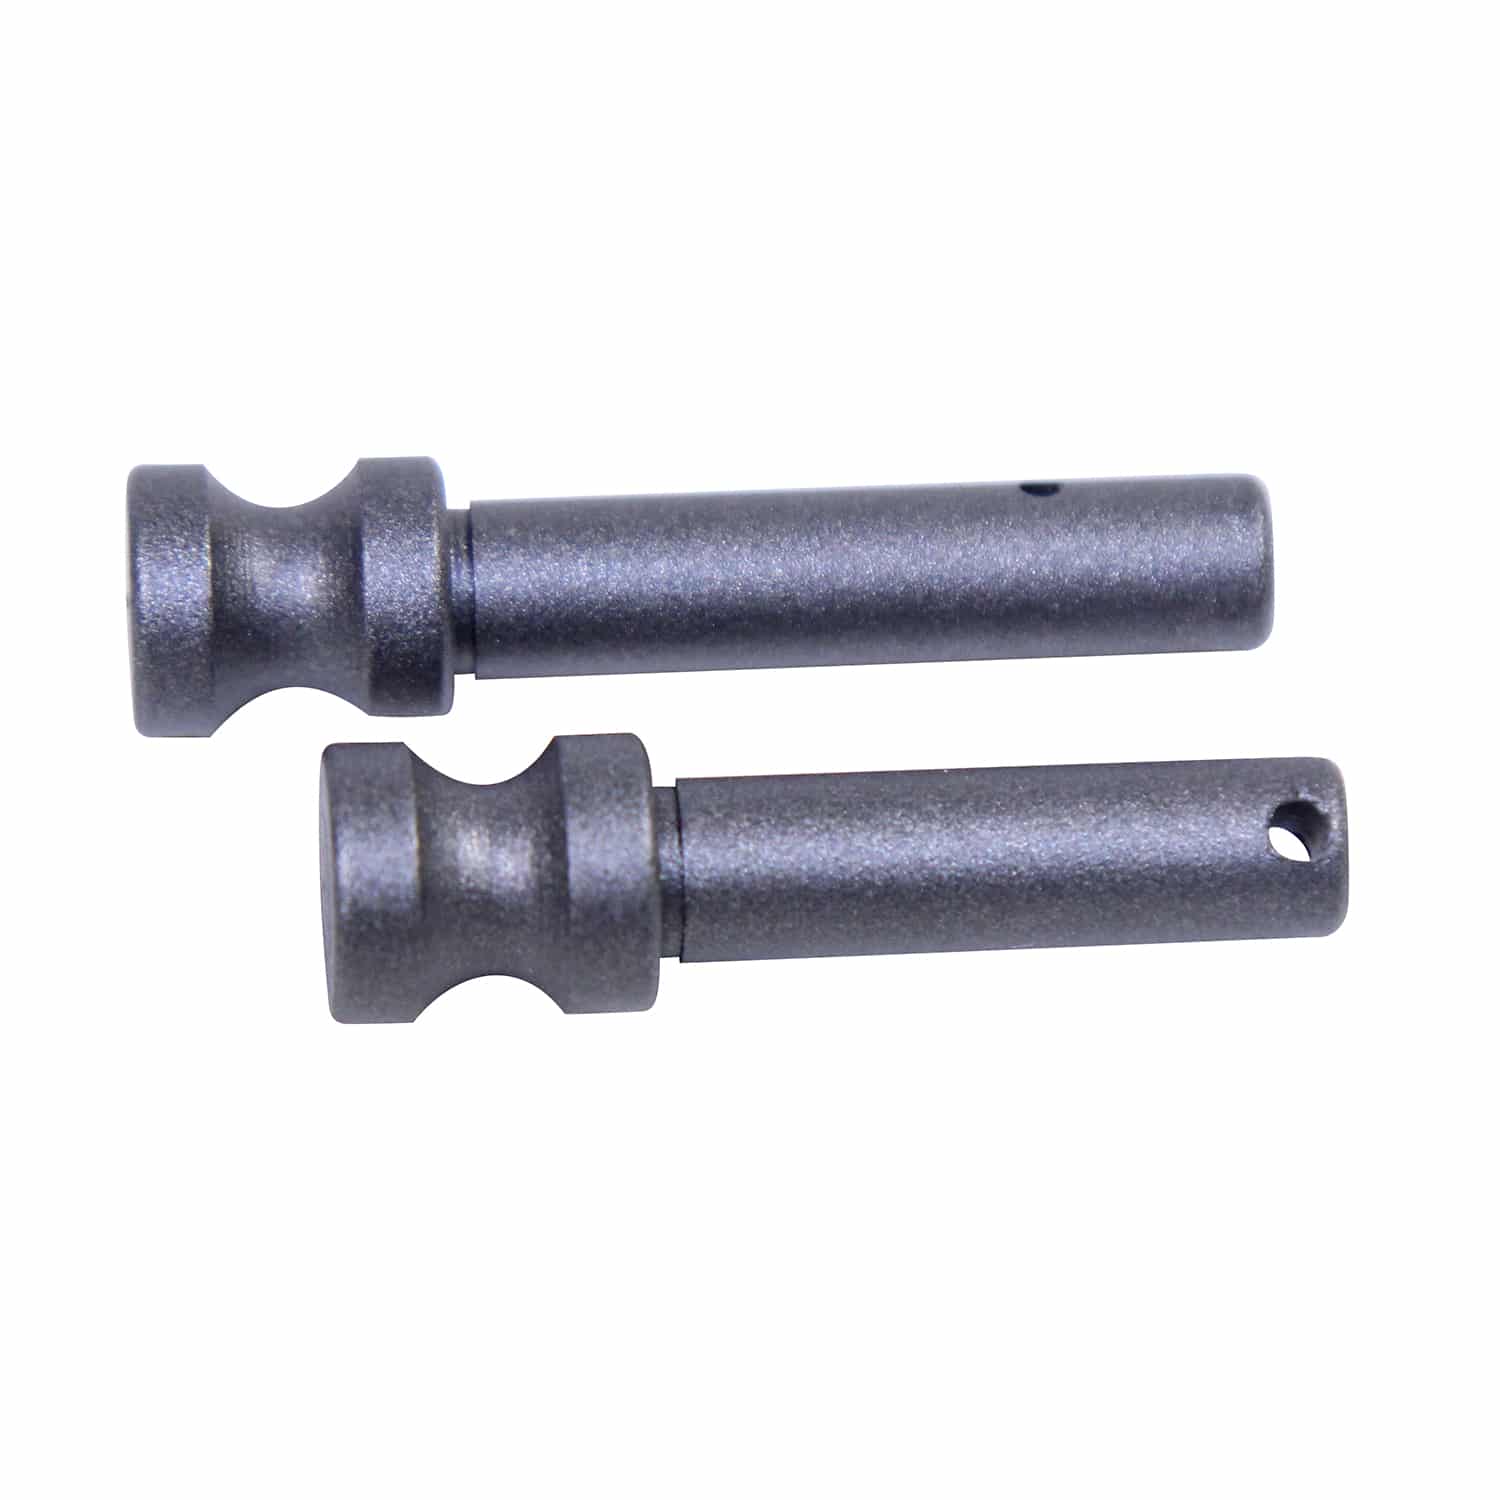 AR 5.56 Cal Extended Takedown Pin Set in Tungsten